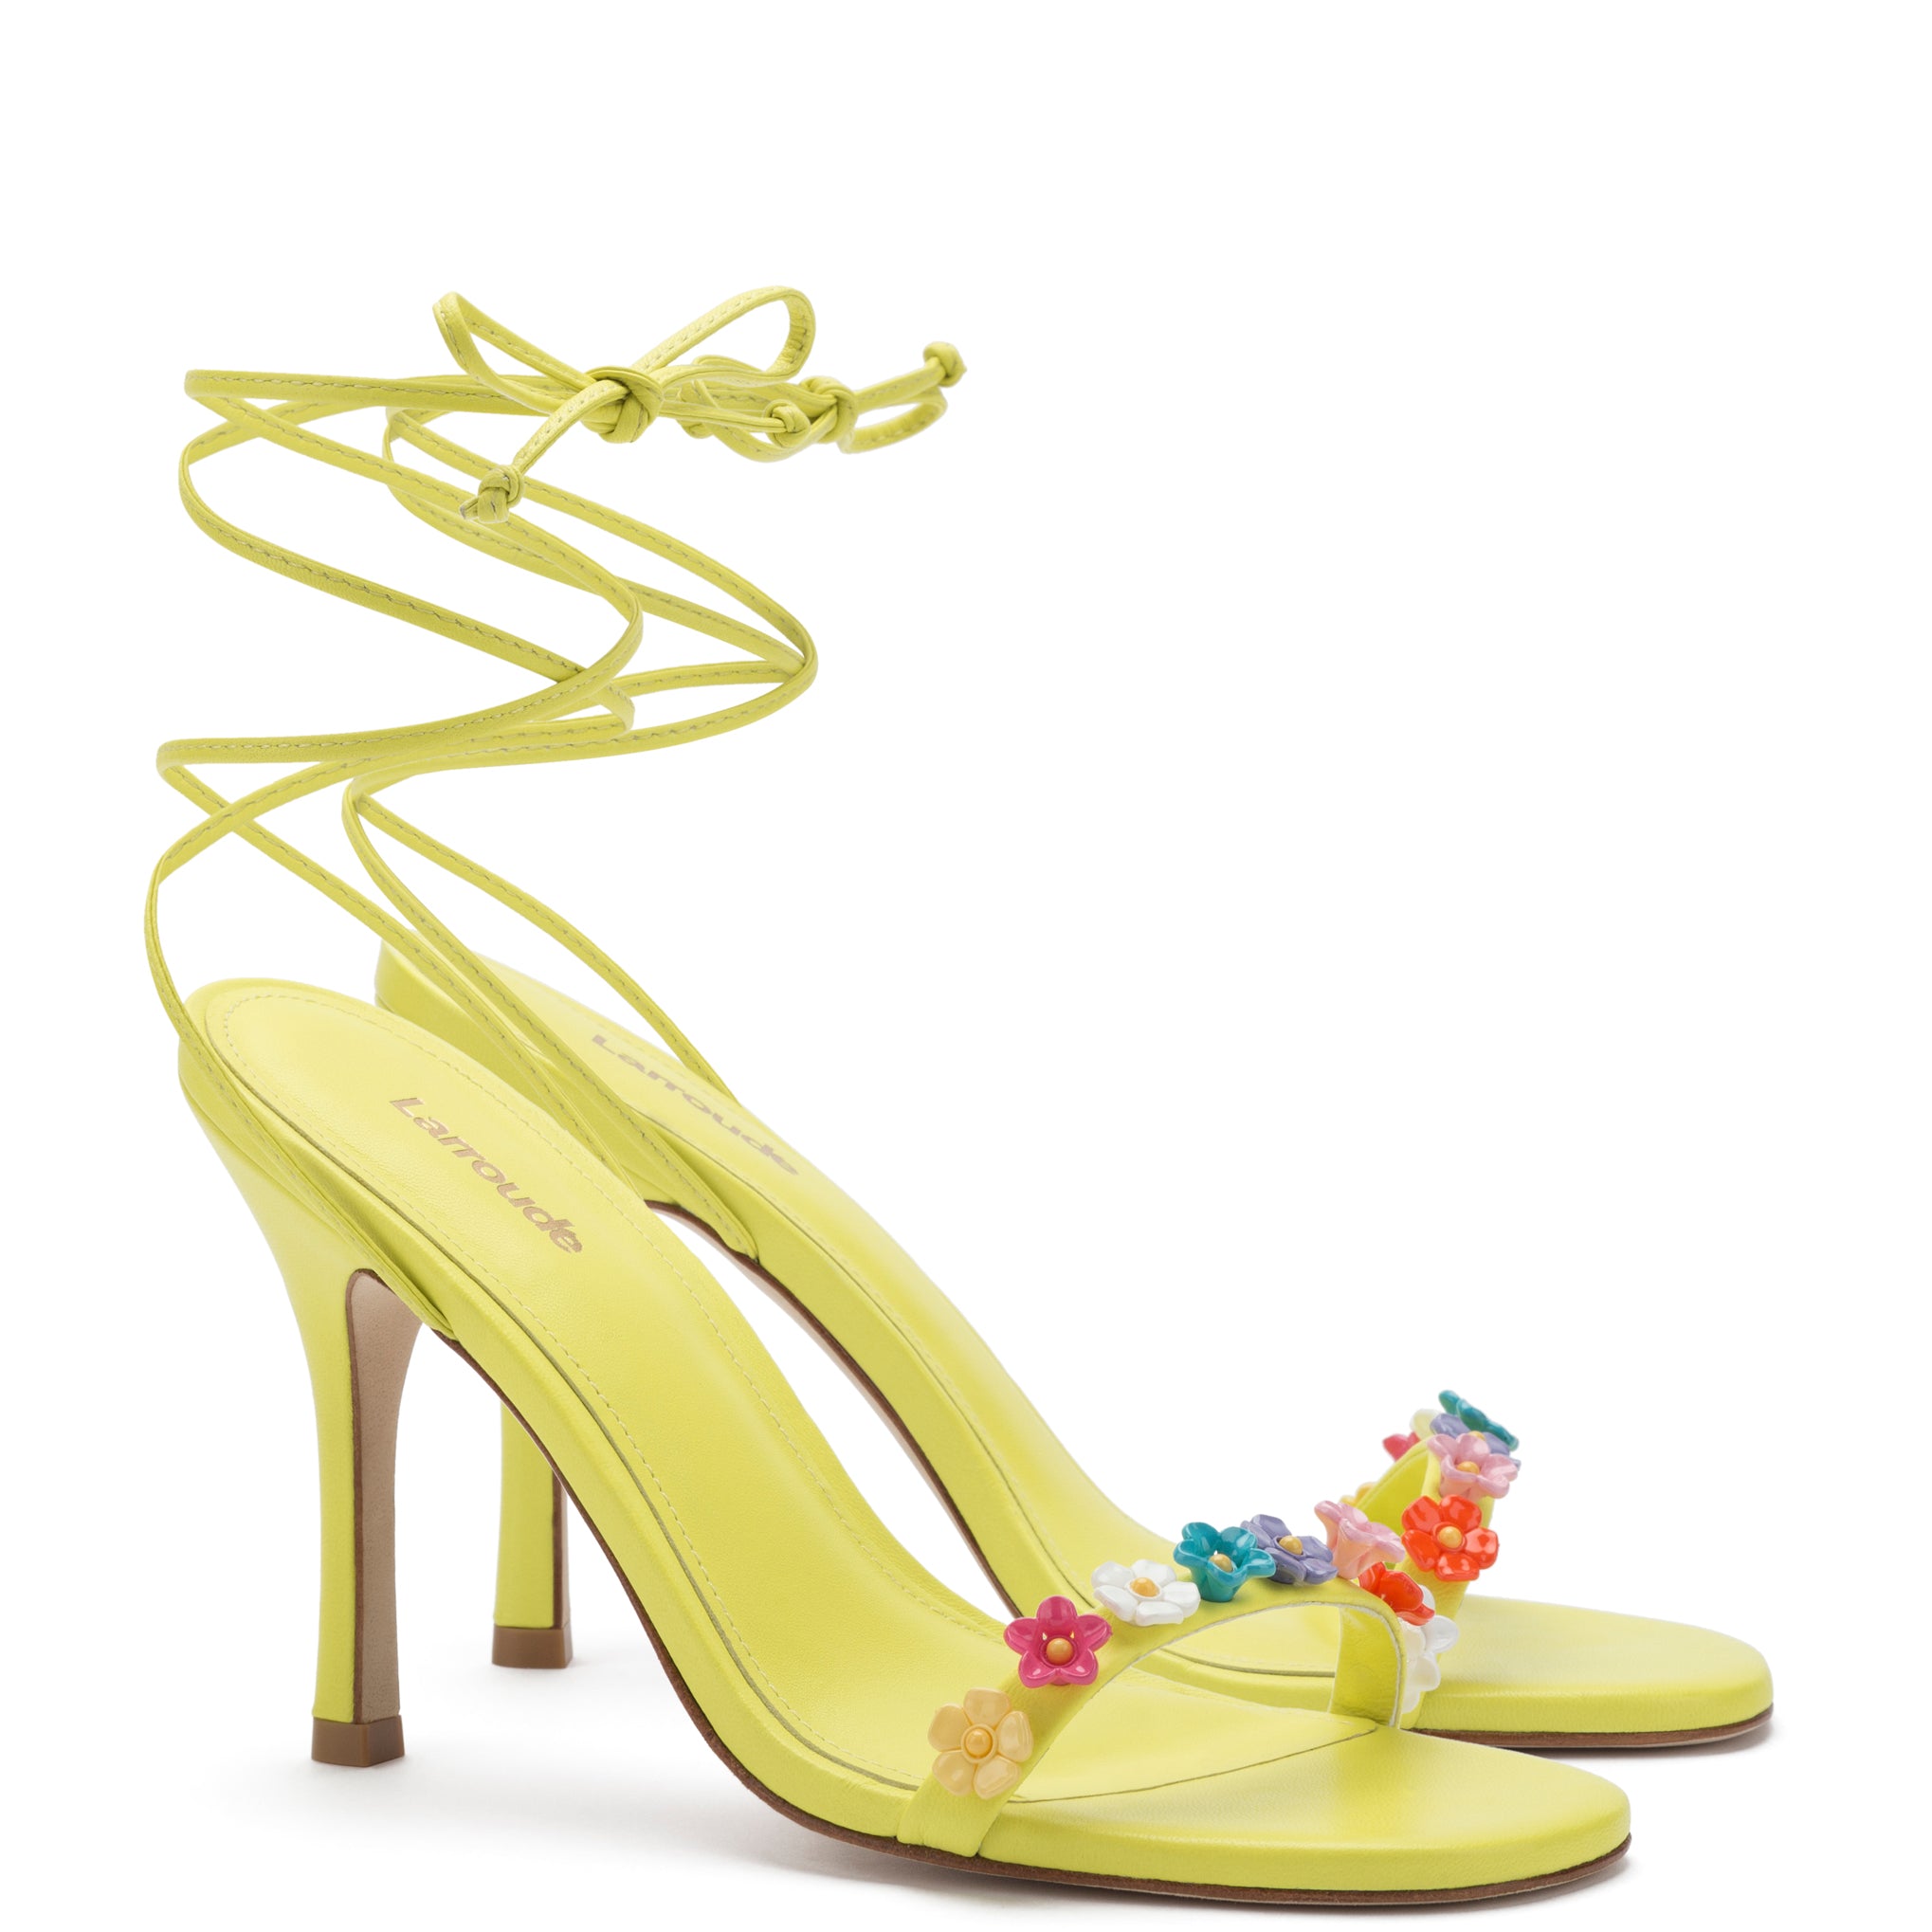 Luxury women's shoes - Sporty Kate 85 light yellow patent leather pumps